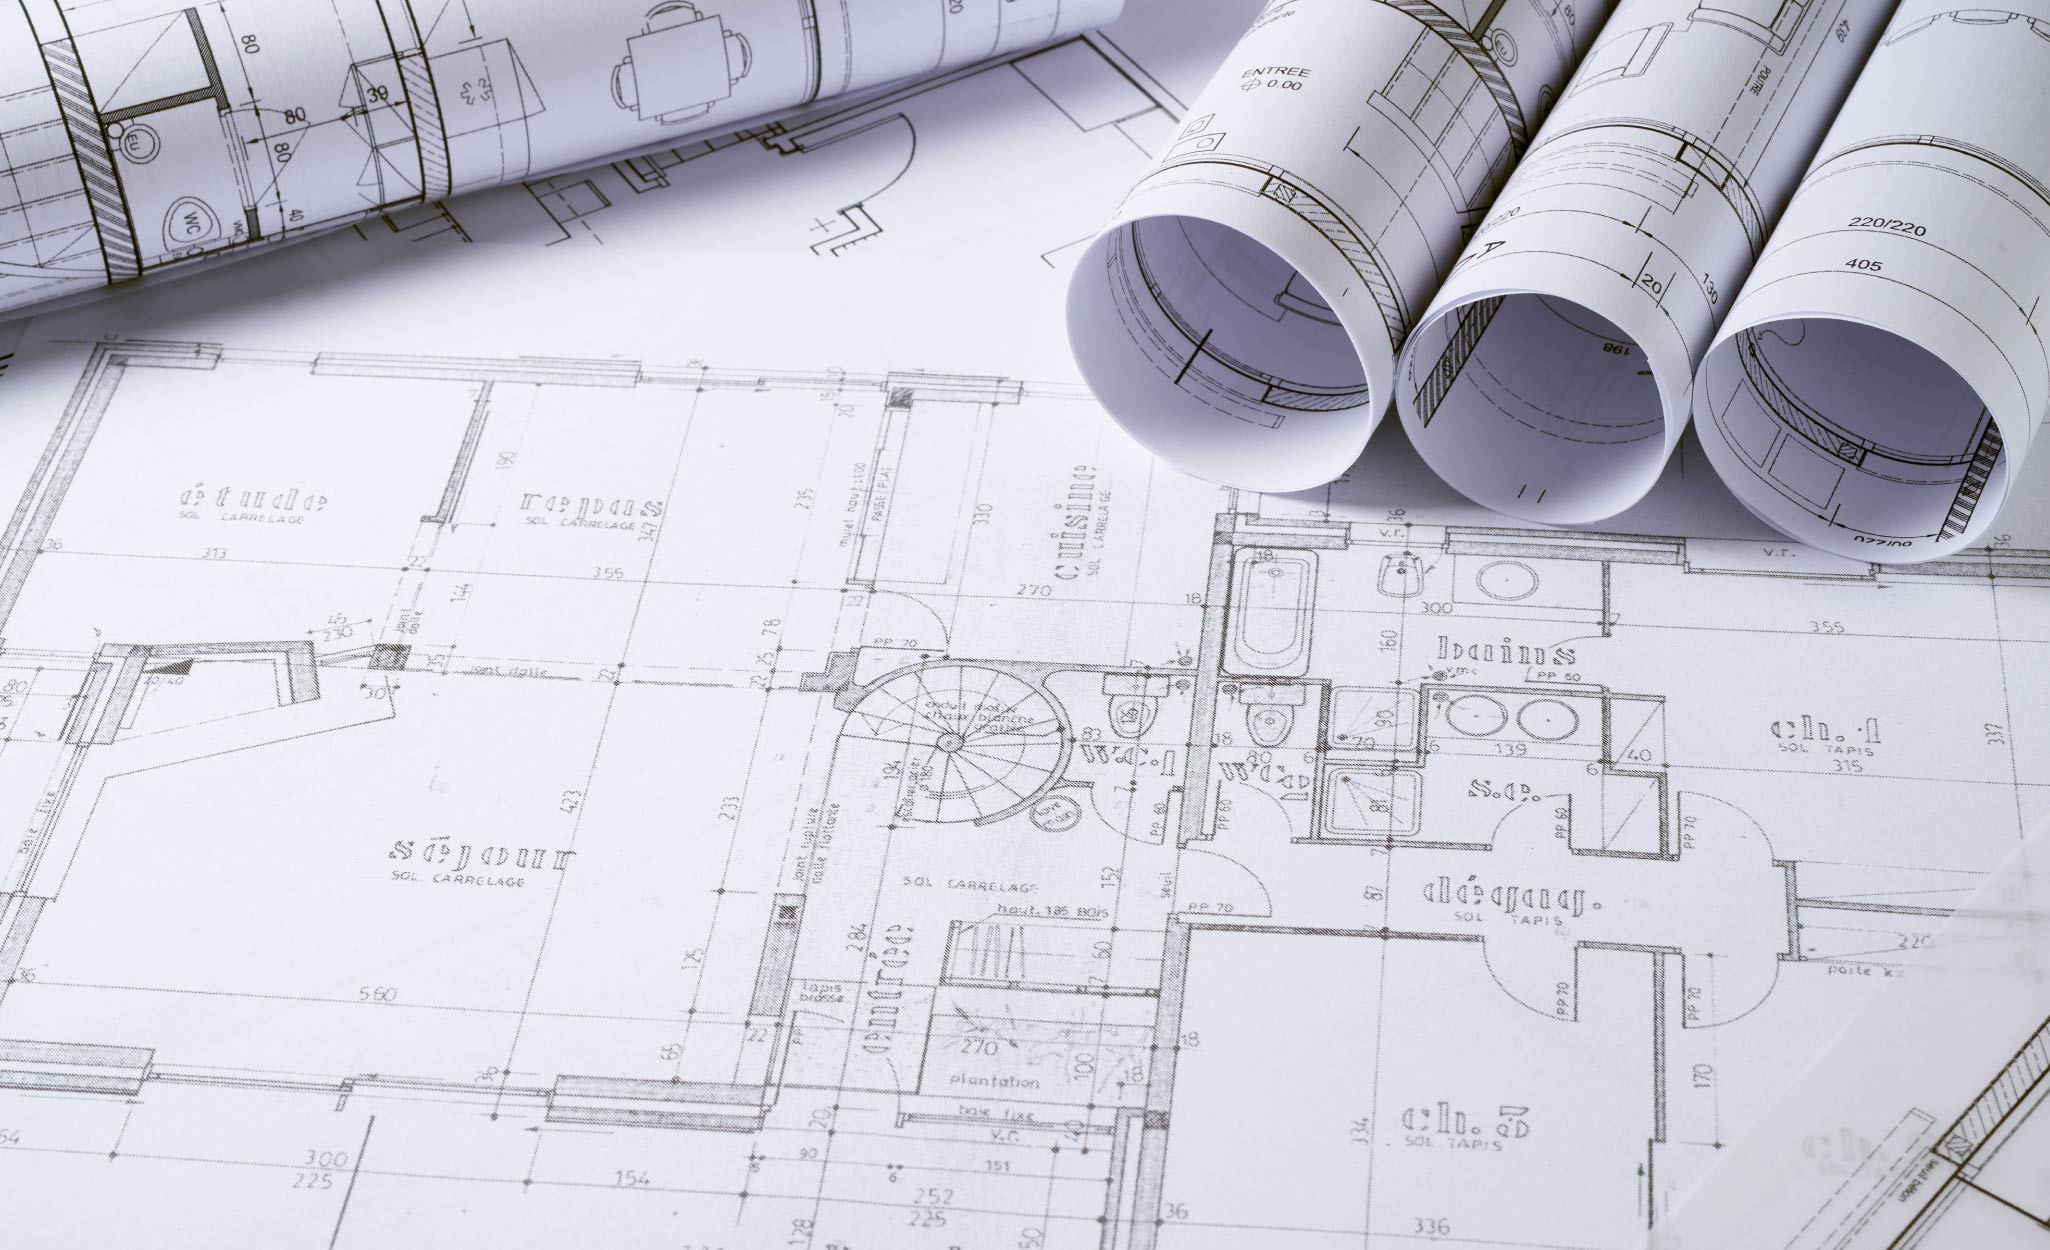 House plans are unrolled on a table.